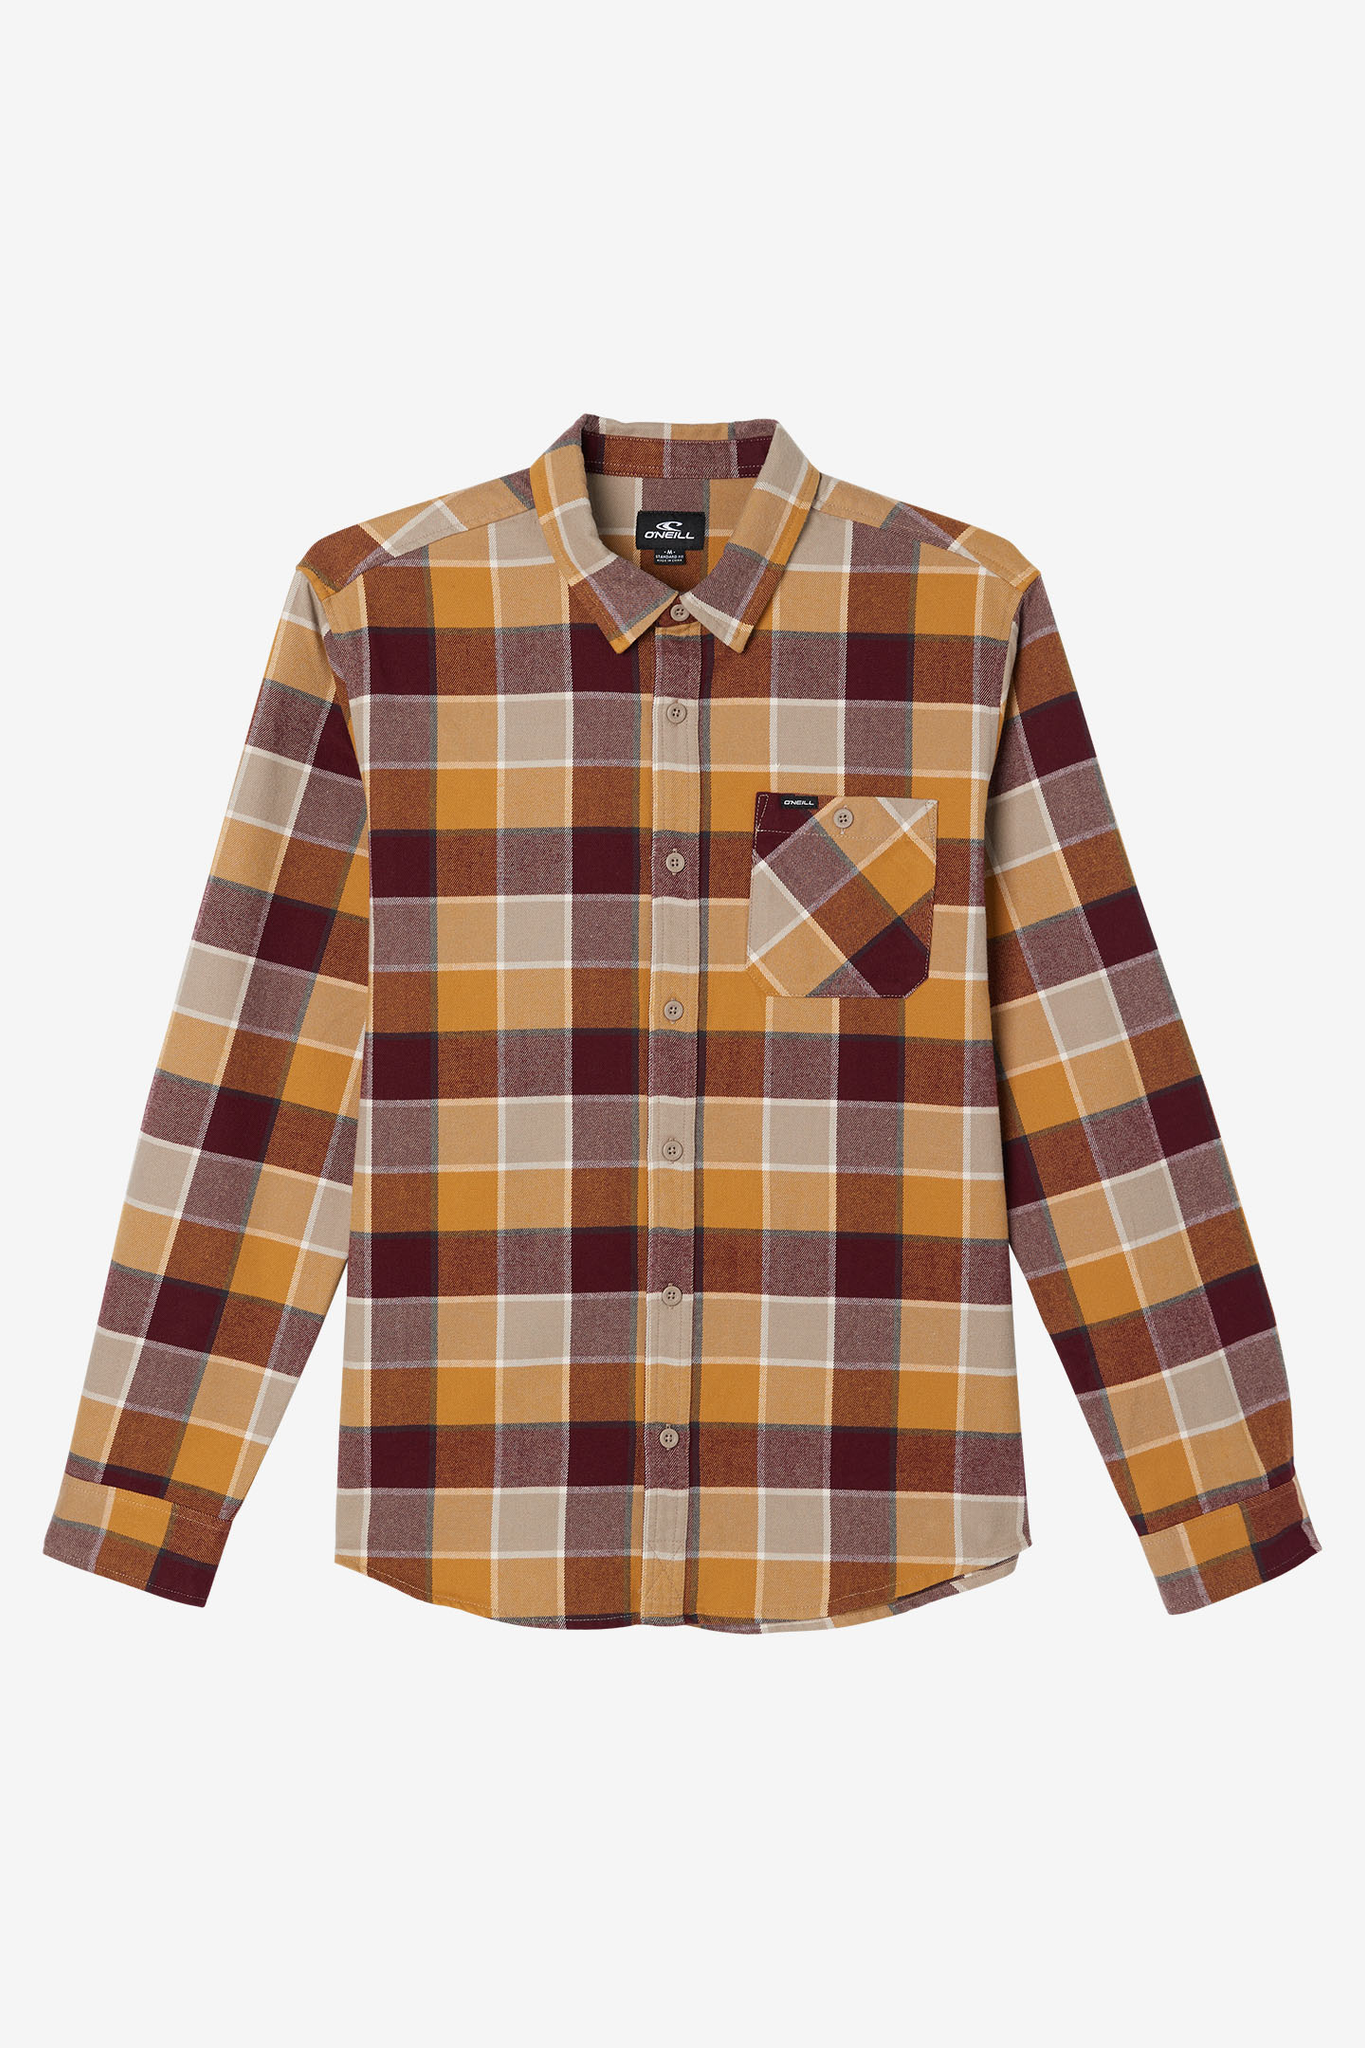 WINSLOW PLAID, Chestnut, T1031, Collection Menswear Resource from